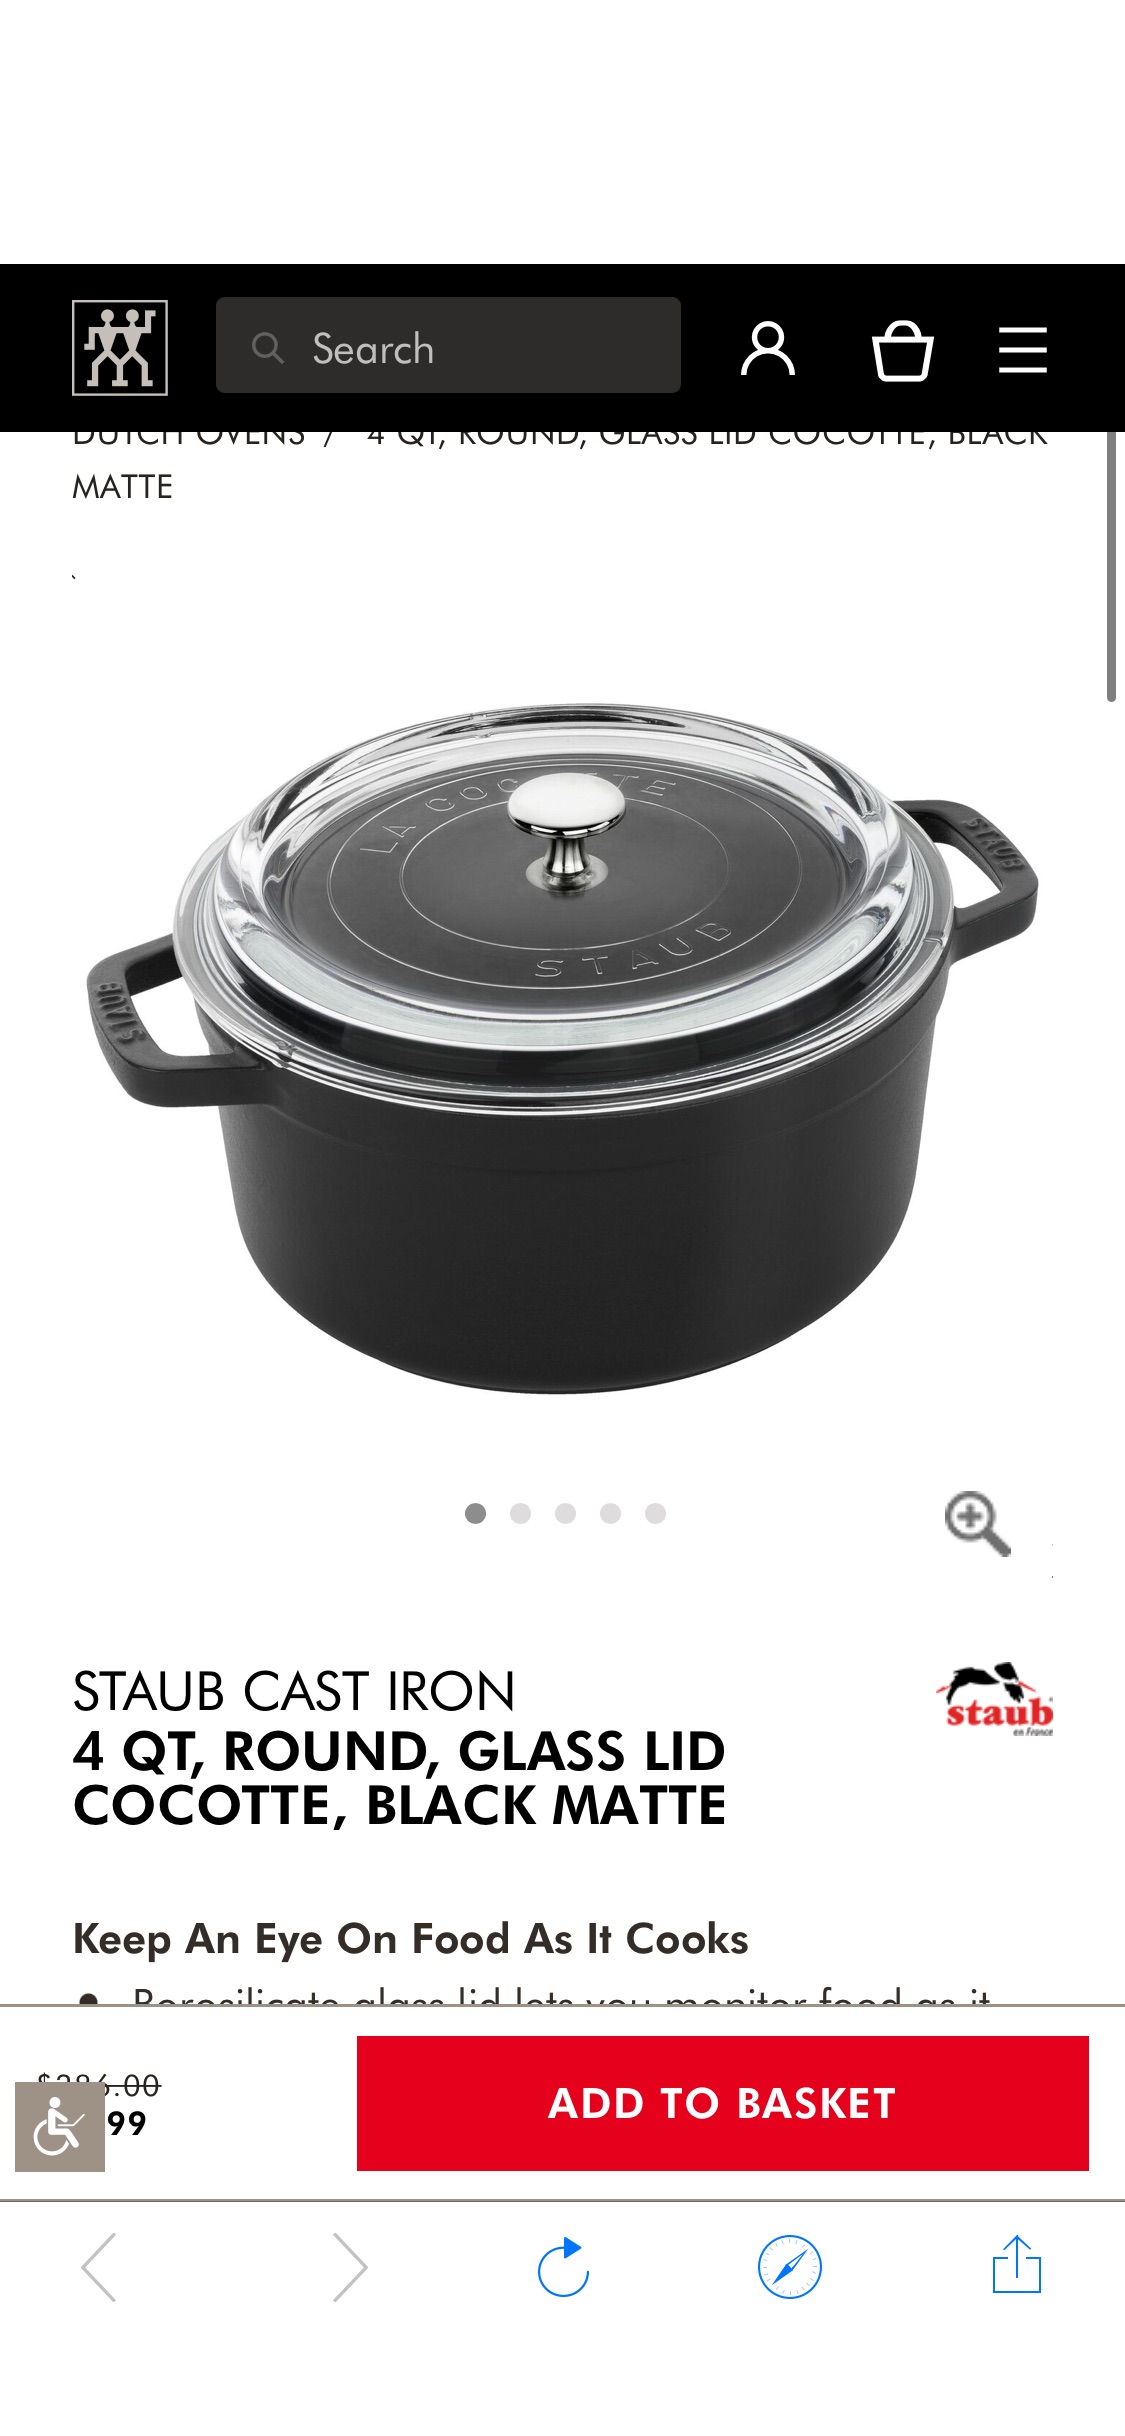 Buy Staub Cast Iron Cocotte with glass lid | ZWILLING.COM 锅